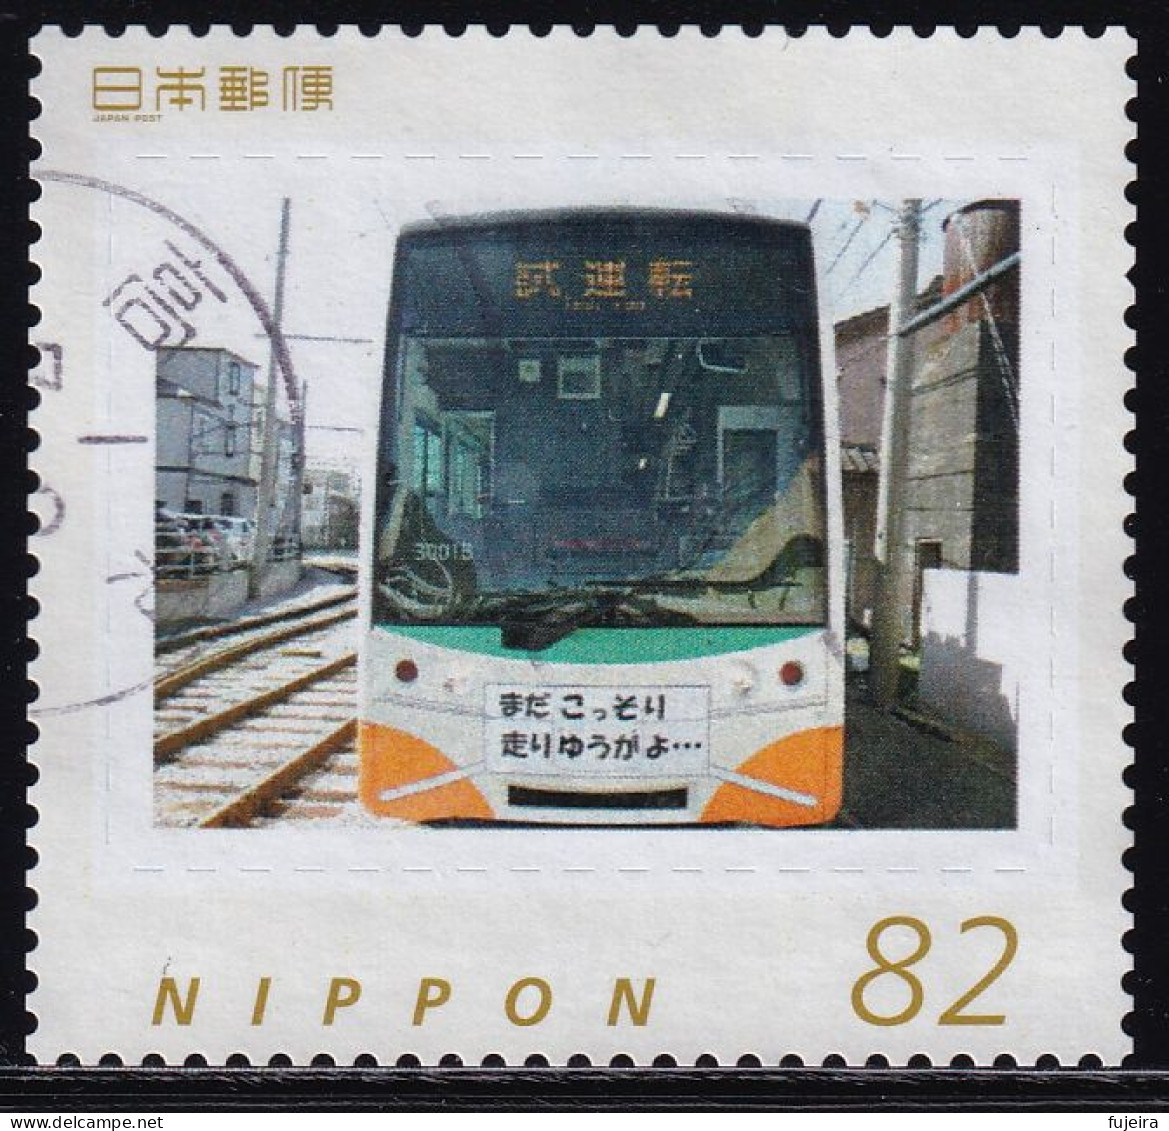 Japan Personalized Stamp, Train (jpw0025) Used - Oblitérés